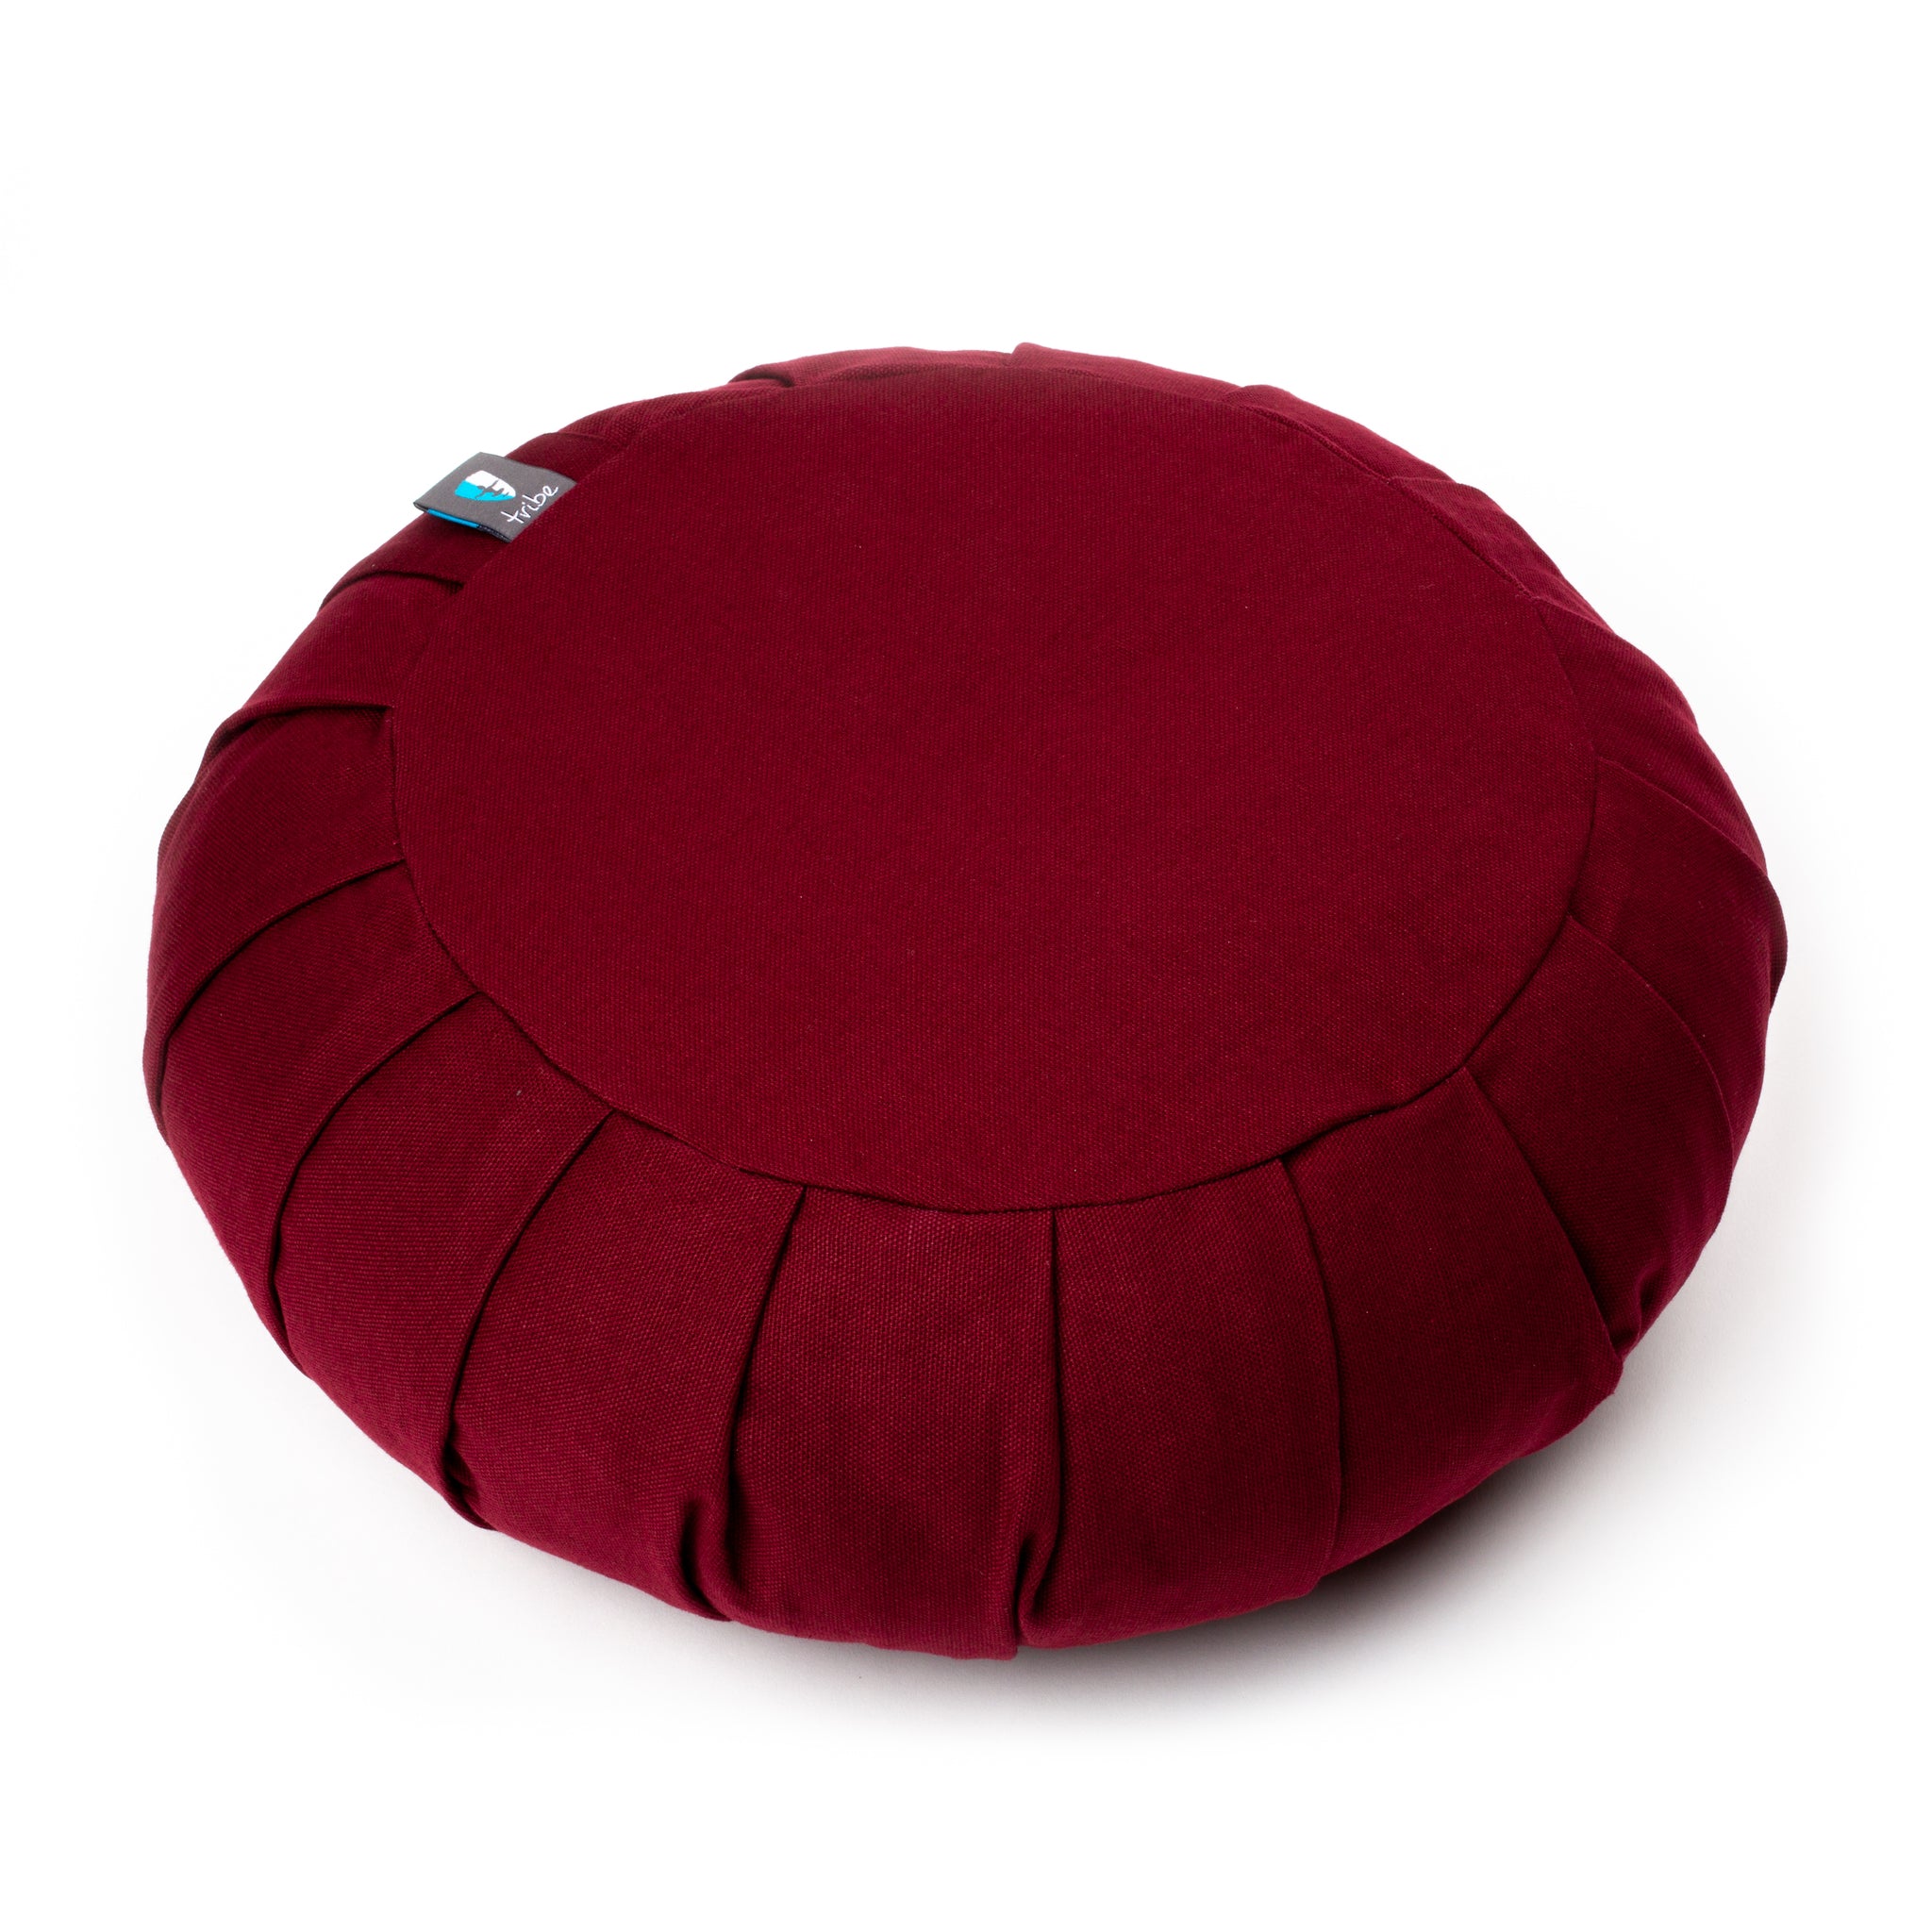 The Complete Guide to Sitting on a Floor Cushion – Solum Cushion Co.